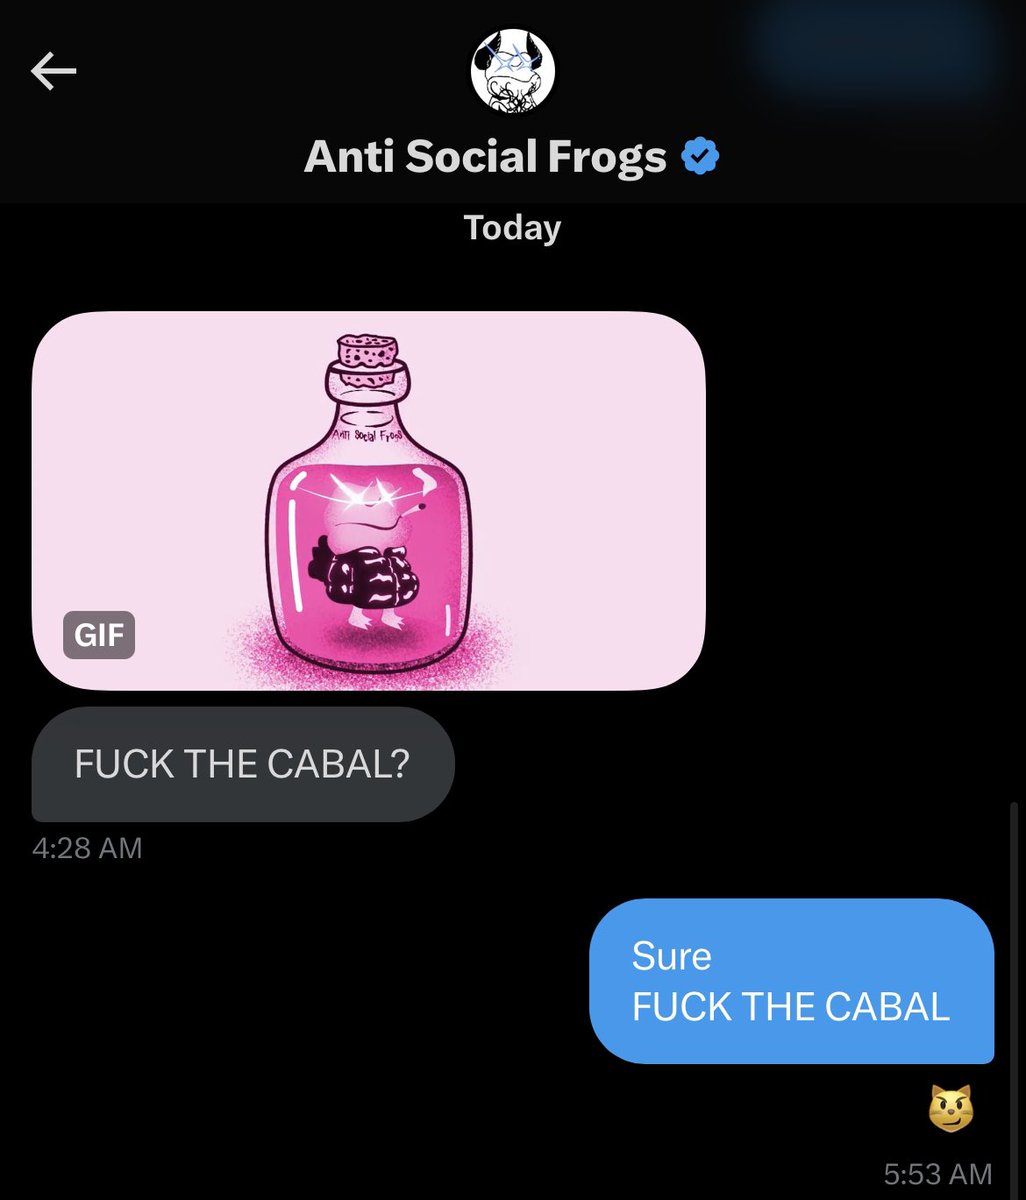 Gm from @AntiSocialFrogs FVCK THE CABAL